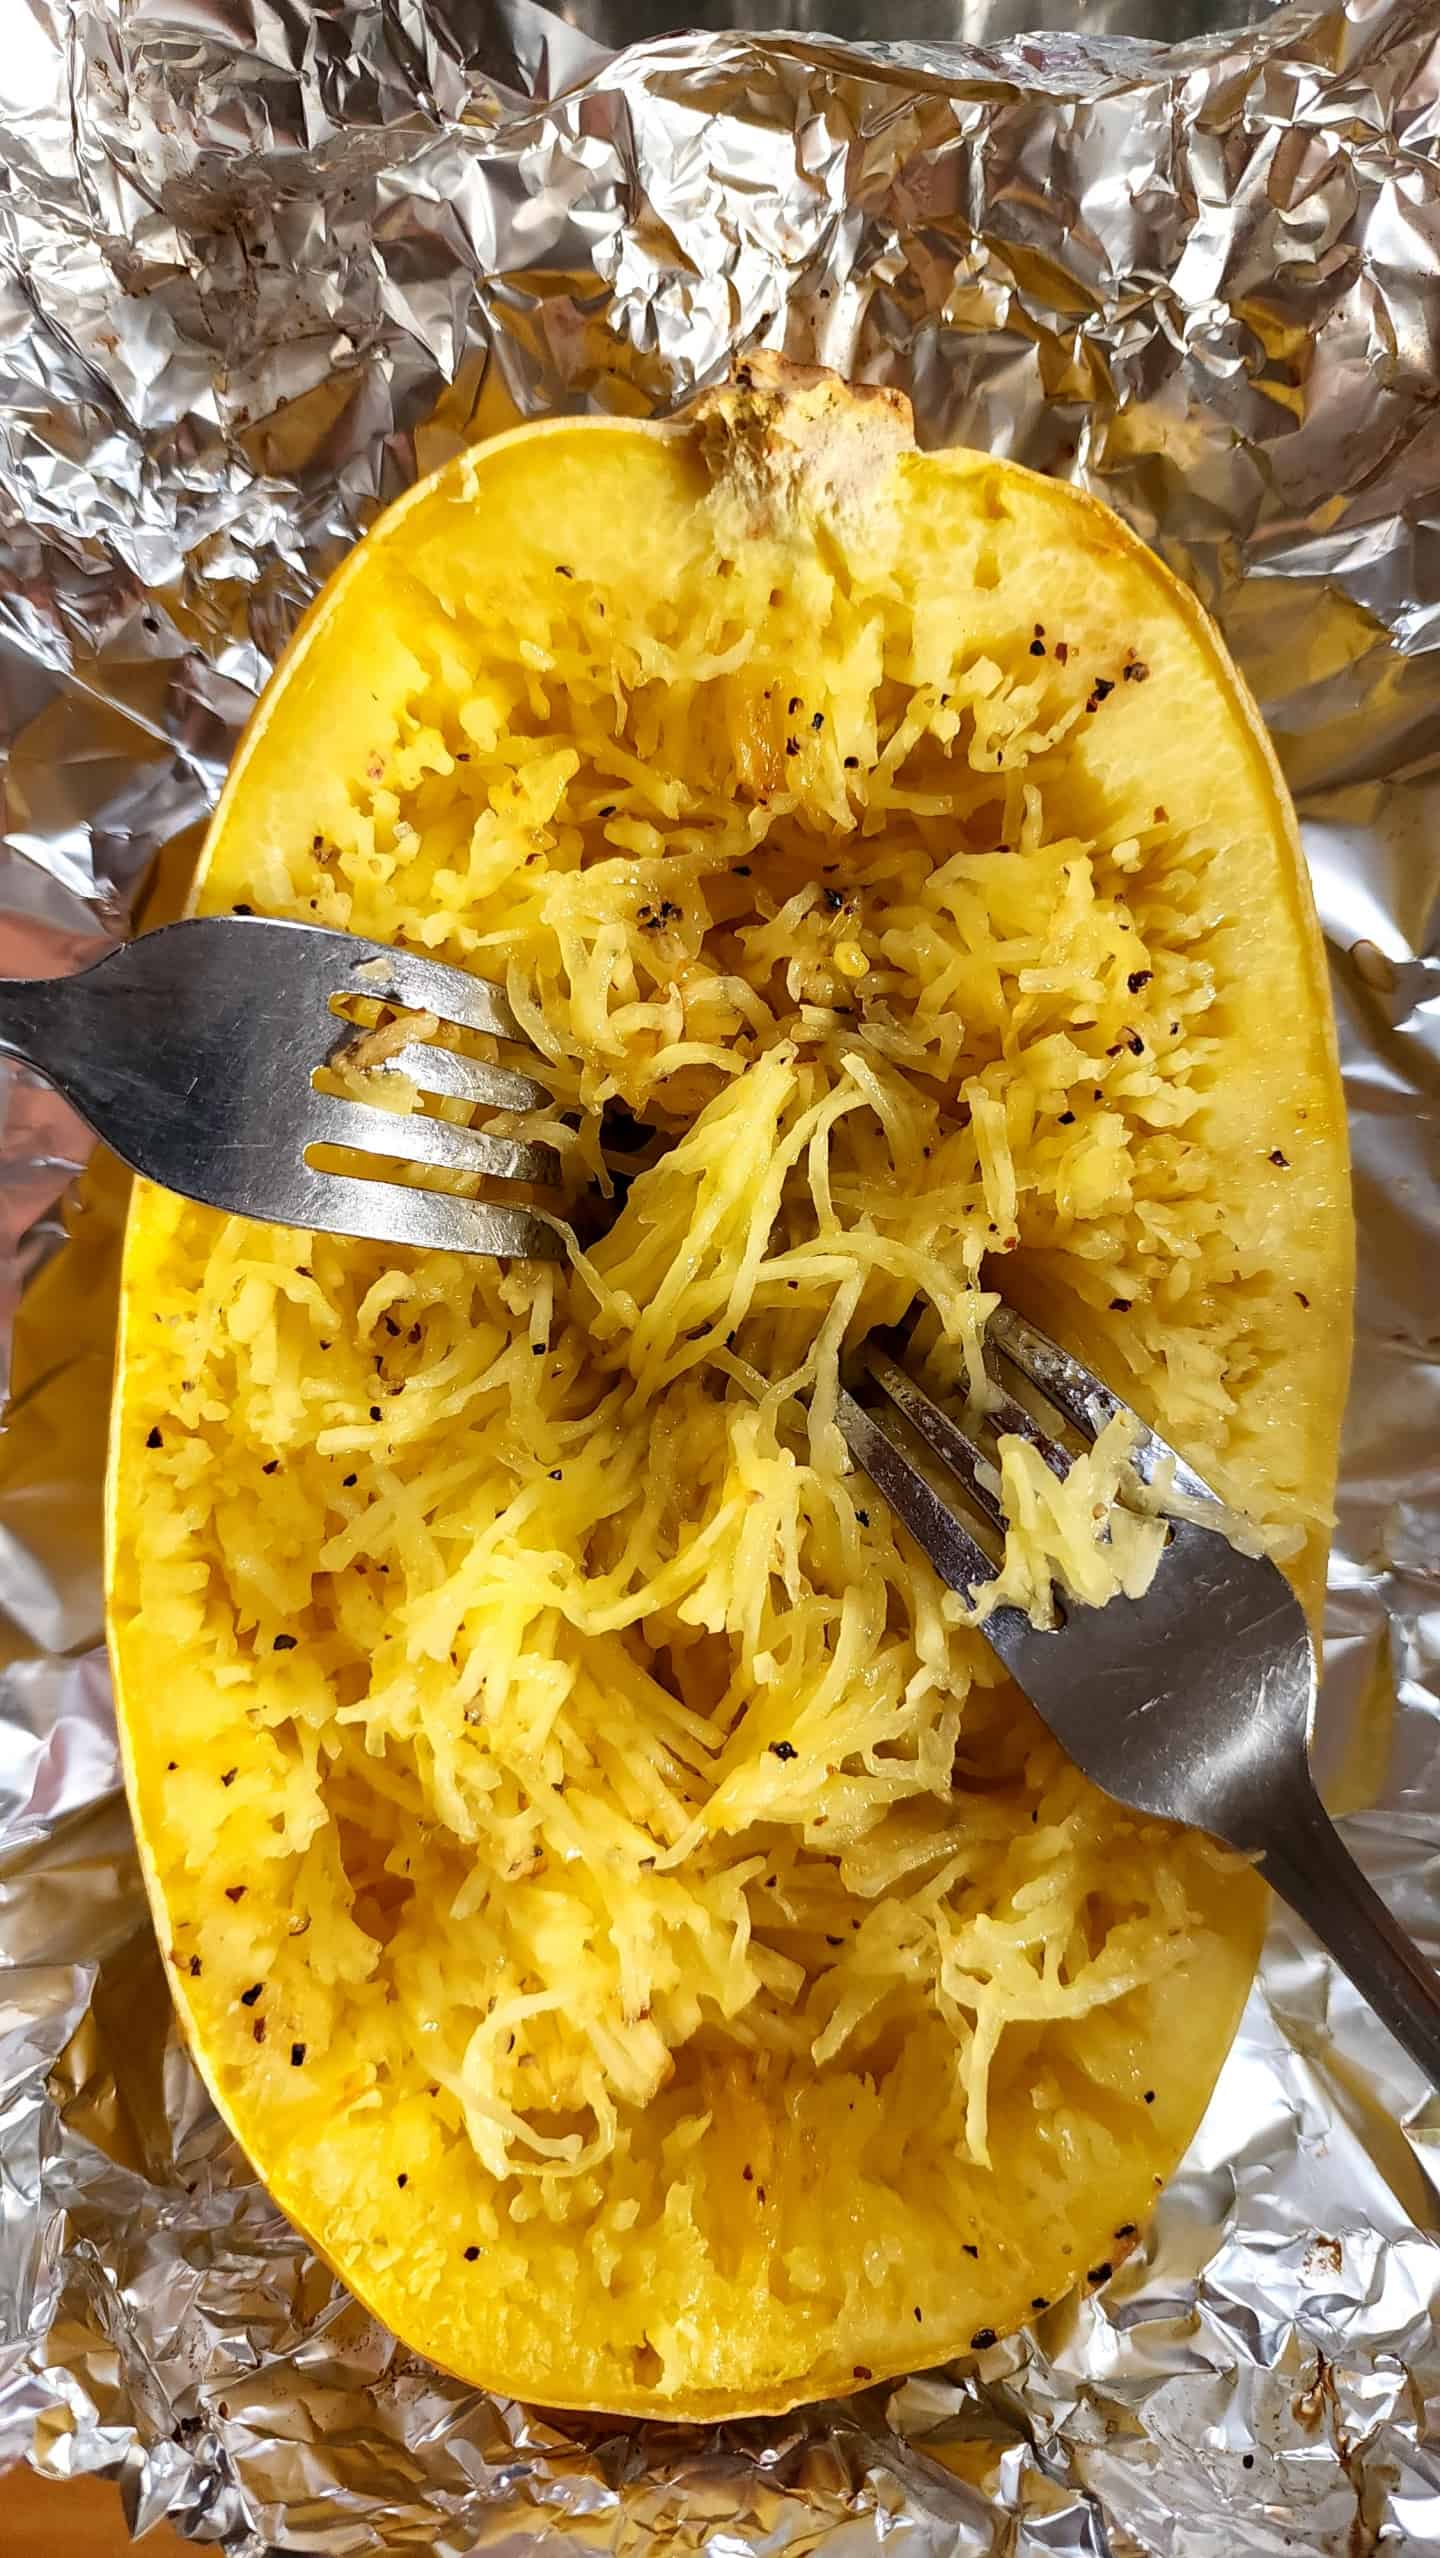 Making spaghetti-like strands from the squash